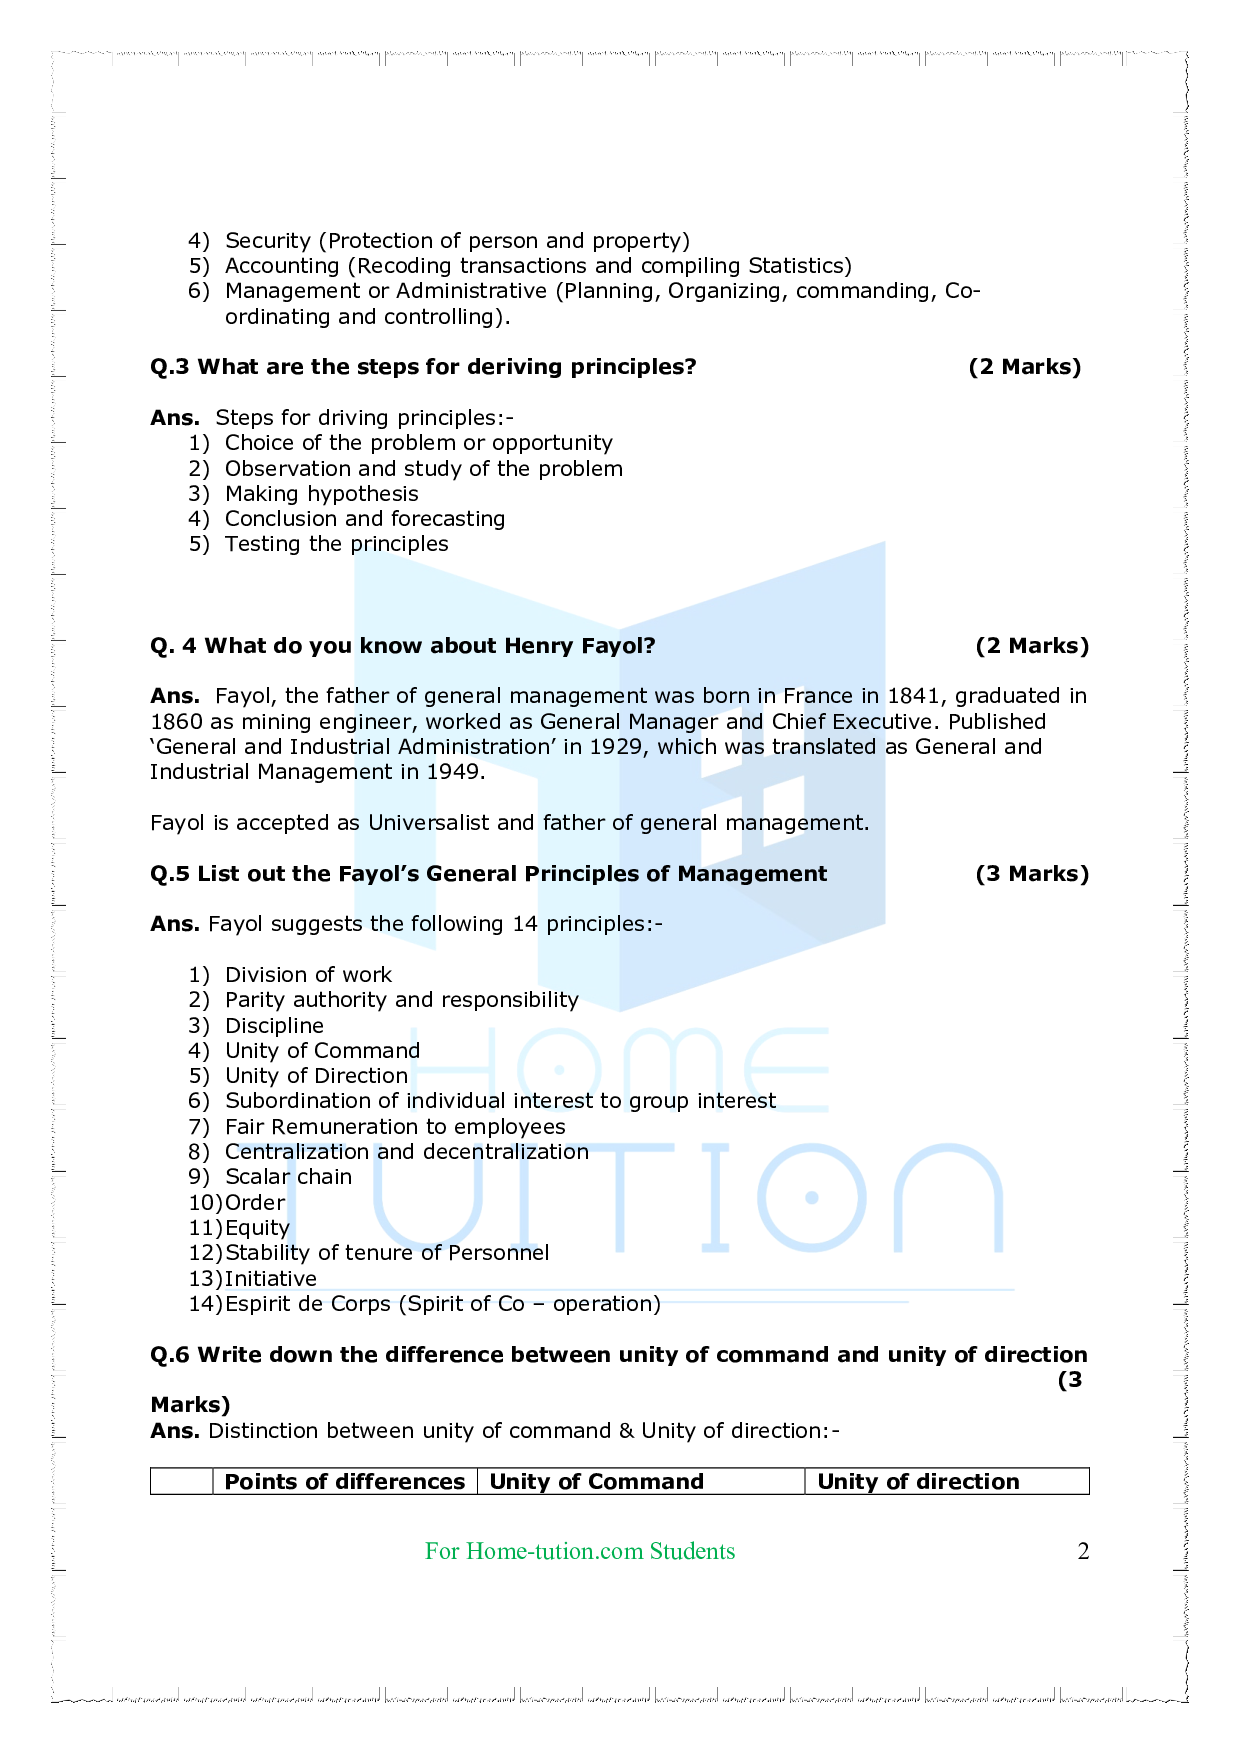 Chapter-2 Principles of Management Questions